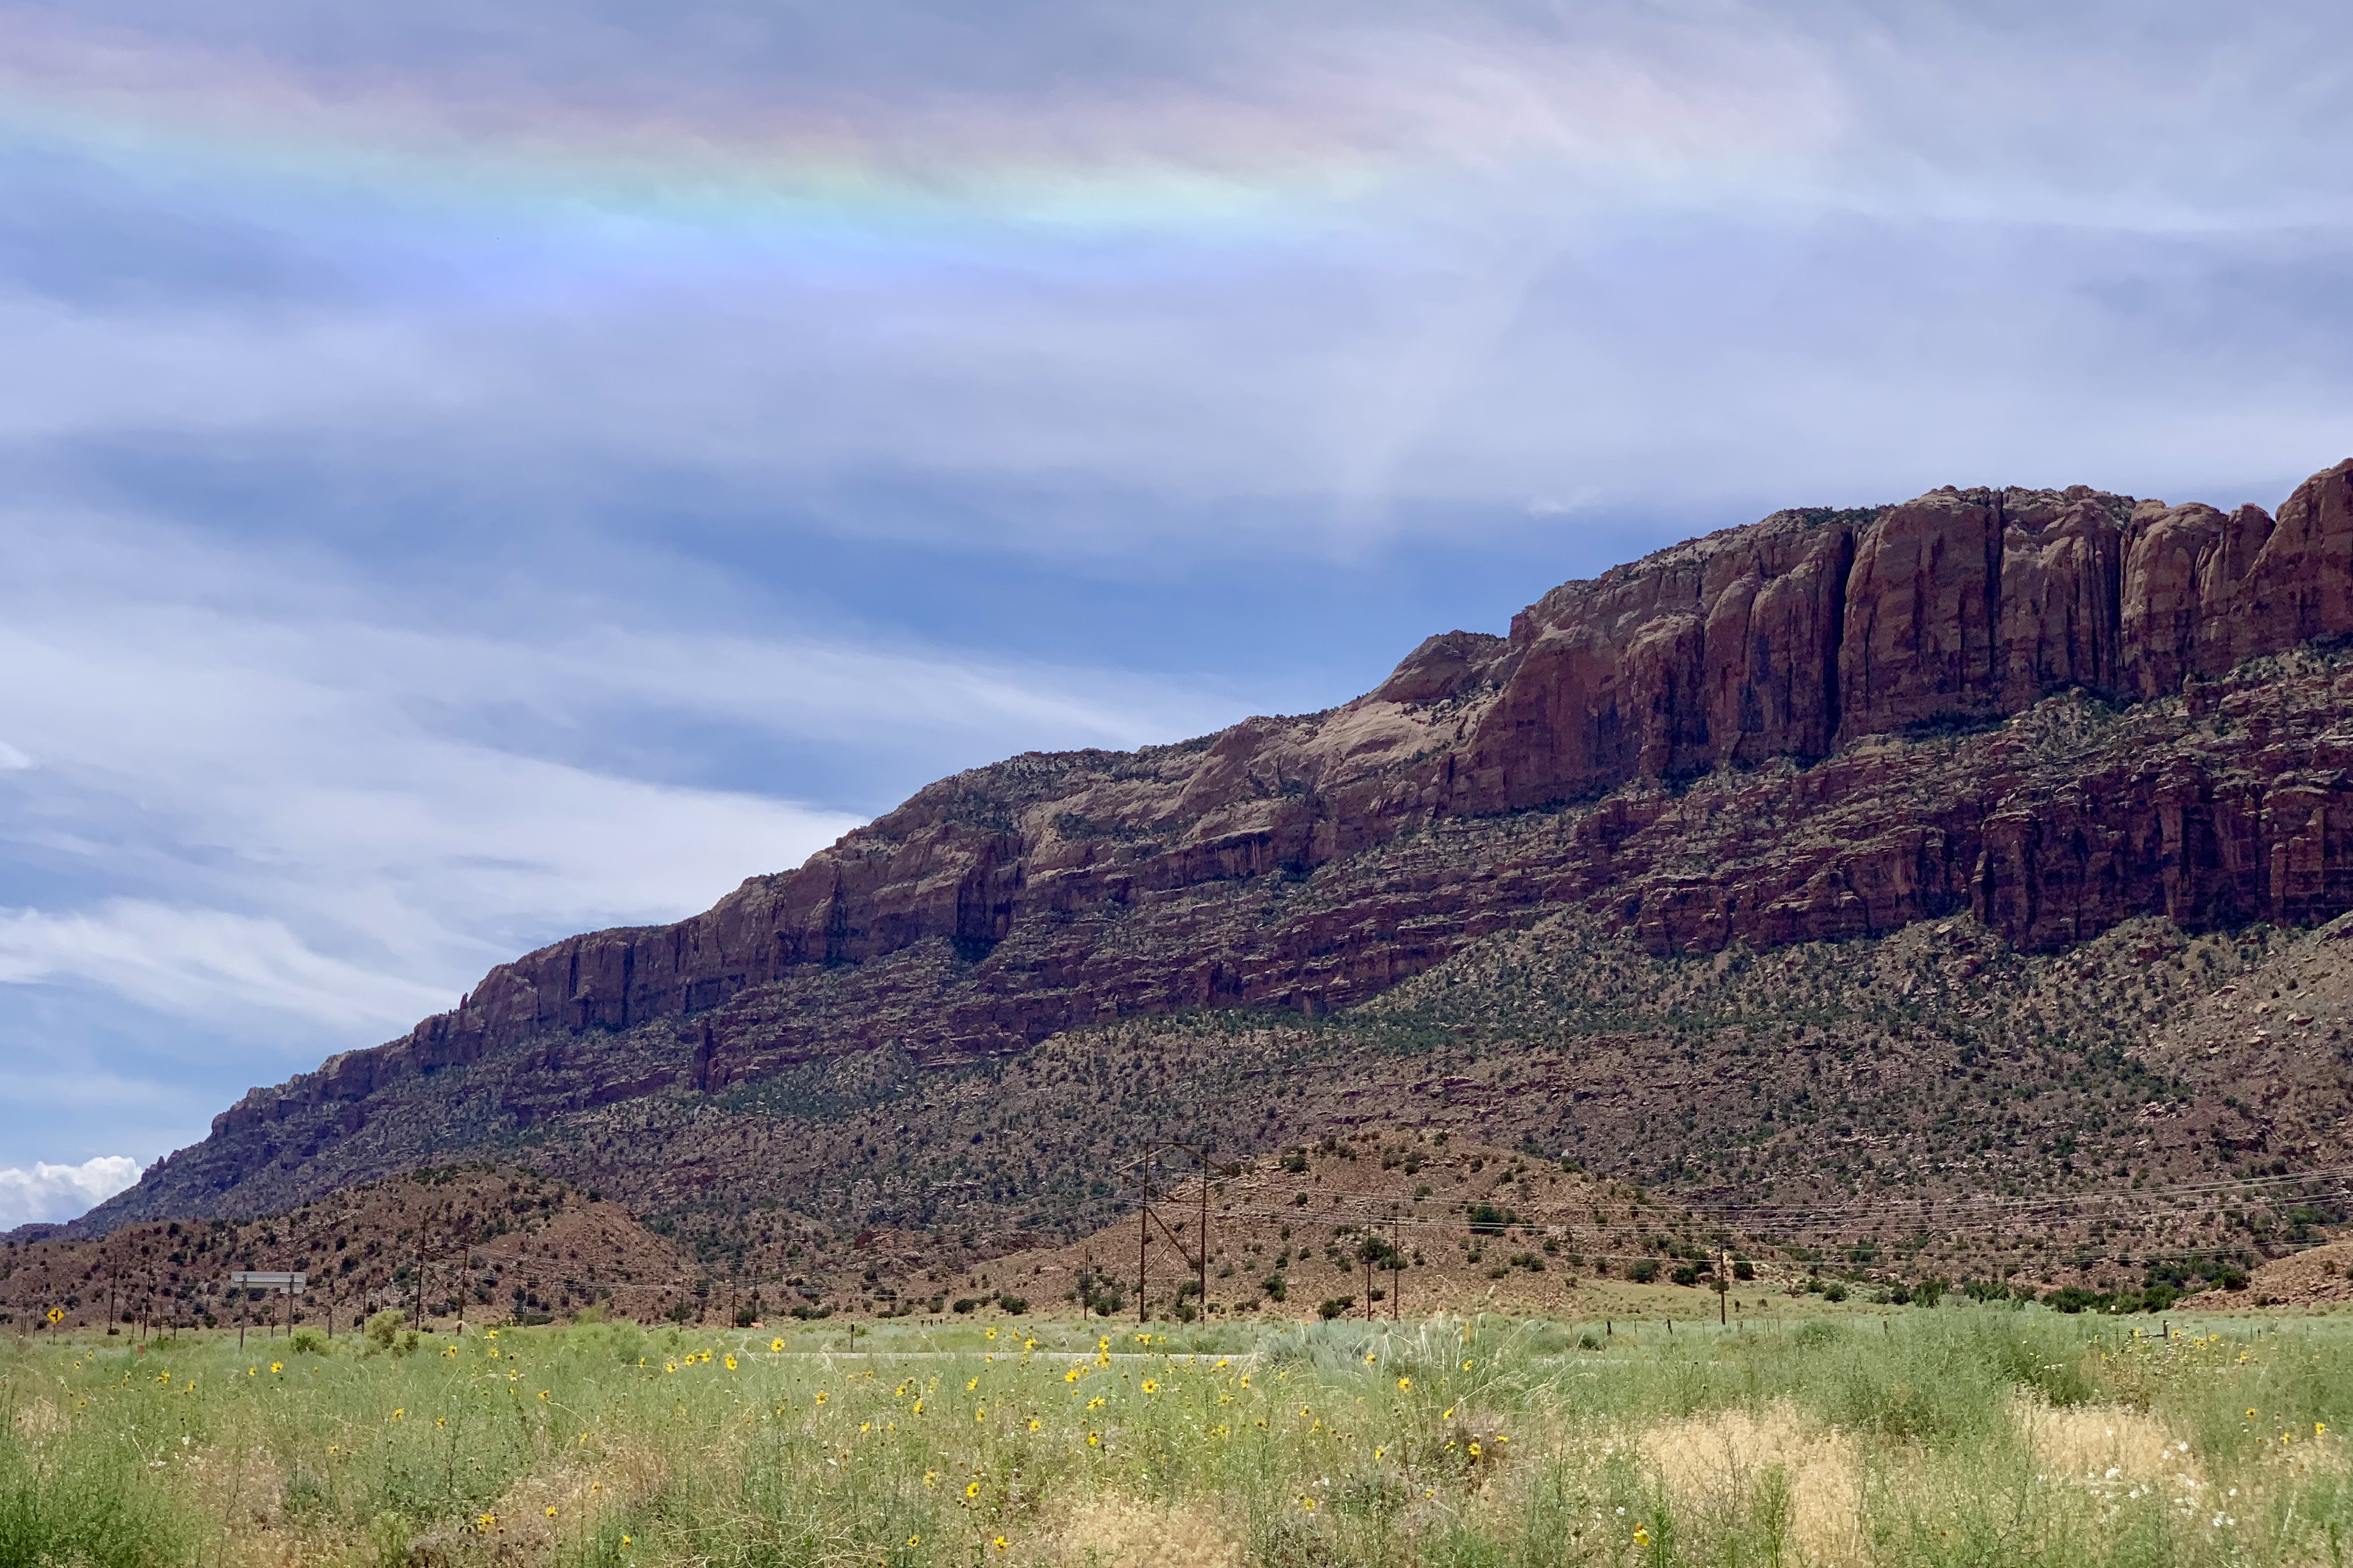 a rainbow appears over the western rim of Moab, which is photographed sloping down to the south, which is left in the photo